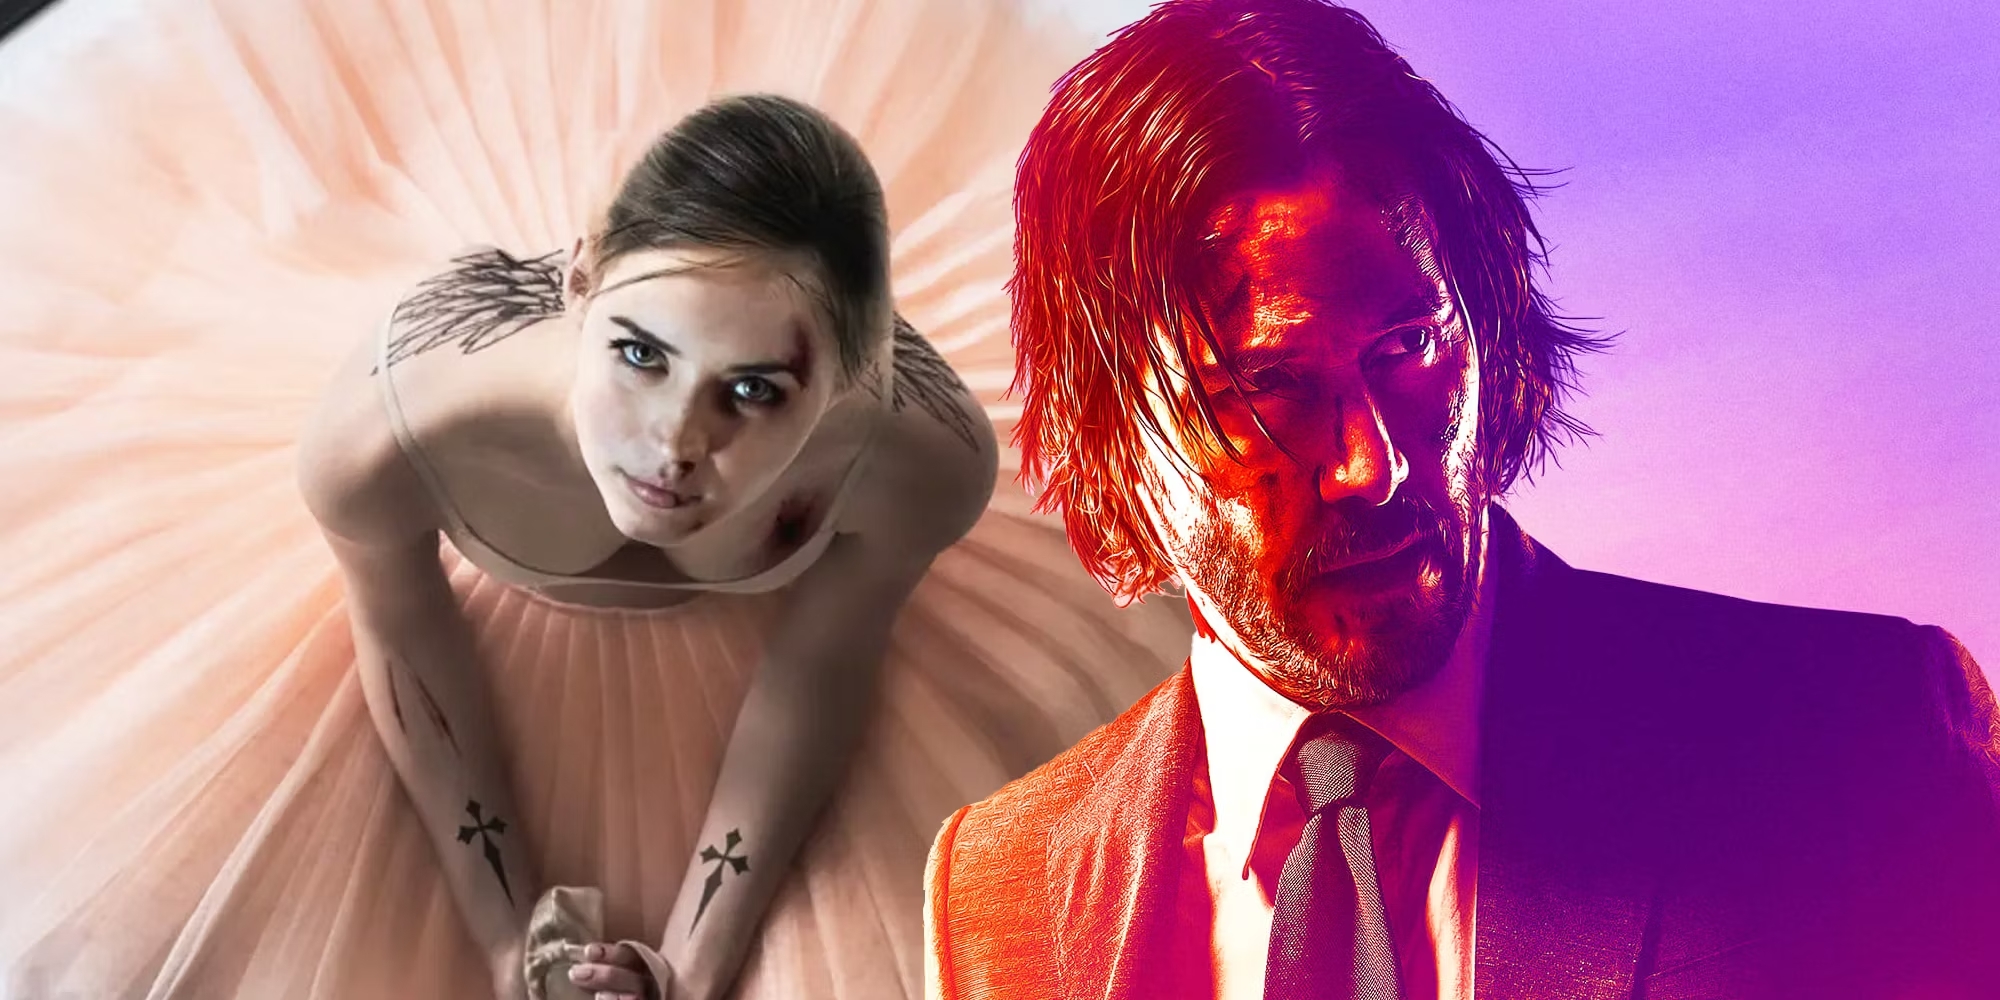 John Wick: How Ballerina Paves The Way For The Franchise'S Future